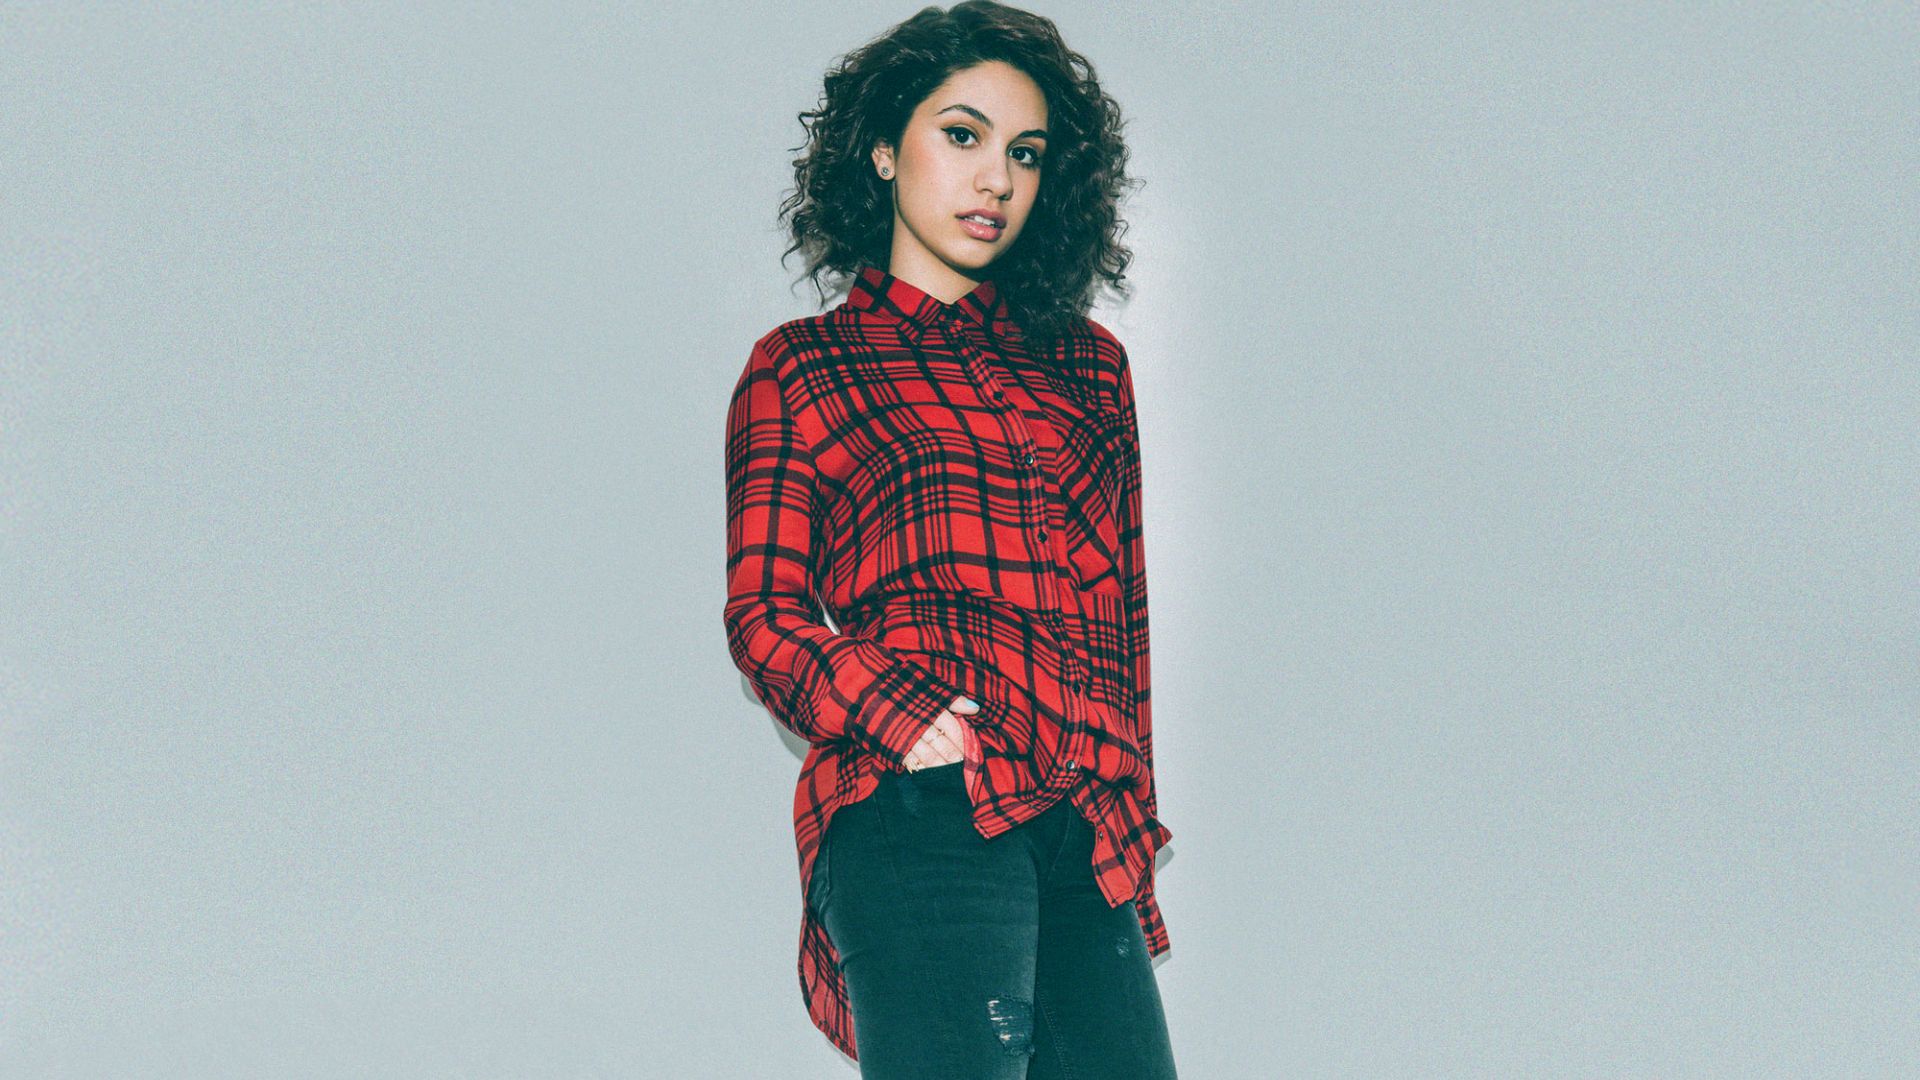 Wallpaper Alessia Cara, curly hair, celebrity